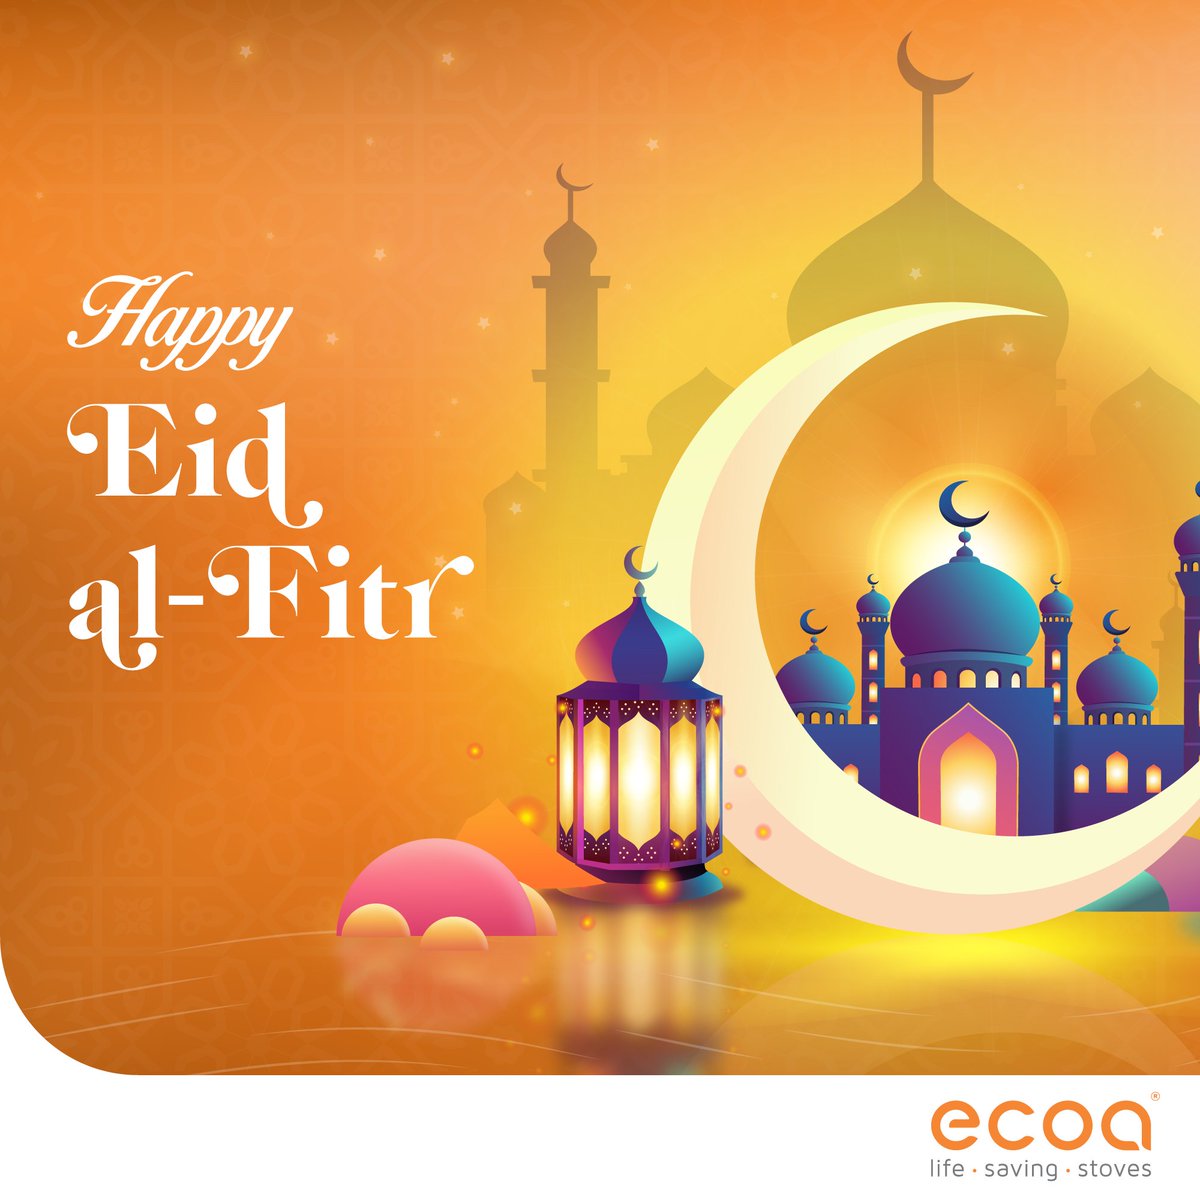 Eid Mubarak! From us at BURN. May this day bring you endless blessings and may the spirit of Eid bring joy to your hearts and homes. #EidBlessings #happyeid #eidmubarakE